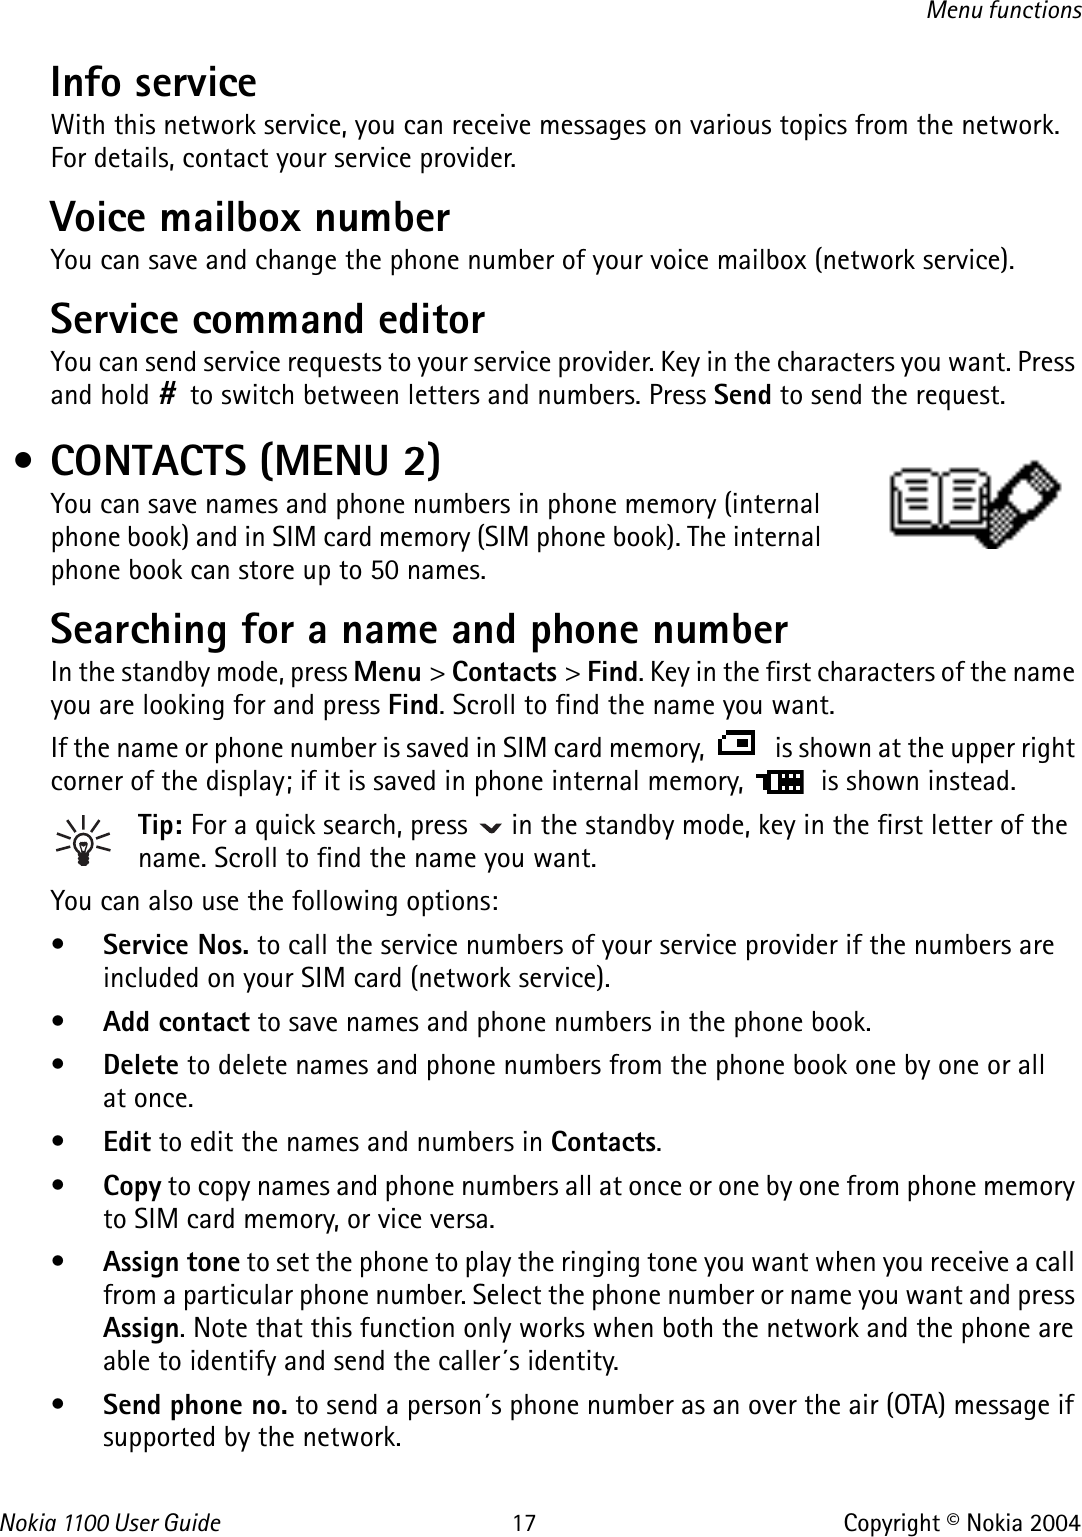 Nokia 110 0  User Guide 17 Copyright © Nokia 2004Menu functionsInfo service With this network service, you can receive messages on various topics from the network. For details, contact your service provider.Voice mailbox number You can save and change the phone number of your voice mailbox (network service). Service command editorYou can send service requests to your service provider. Key in the characters you want. Press and hold # to switch between letters and numbers. Press Send to send the request. • CONTACTS (MENU 2)You can save names and phone numbers in phone memory (internal phone book) and in SIM card memory (SIM phone book). The internal phone book can store up to 50 names.Searching for a name and phone numberIn the standby mode, press Menu &gt; Contacts &gt; Find. Key in the first characters of the name you are looking for and press Find. Scroll to find the name you want.If the name or phone number is saved in SIM card memory,   is shown at the upper right corner of the display; if it is saved in phone internal memory,   is shown instead.Tip: For a quick search, press   in the standby mode, key in the first letter of the name. Scroll to find the name you want.You can also use the following options:•Service Nos. to call the service numbers of your service provider if the numbers are included on your SIM card (network service).•Add contact to save names and phone numbers in the phone book. •Delete to delete names and phone numbers from the phone book one by one or all at once. •Edit to edit the names and numbers in Contacts.•Copy to copy names and phone numbers all at once or one by one from phone memory to SIM card memory, or vice versa.•Assign tone to set the phone to play the ringing tone you want when you receive a call from a particular phone number. Select the phone number or name you want and press Assign. Note that this function only works when both the network and the phone are able to identify and send the caller´s identity. •Send phone no. to send a person´s phone number as an over the air (OTA) message if supported by the network. 